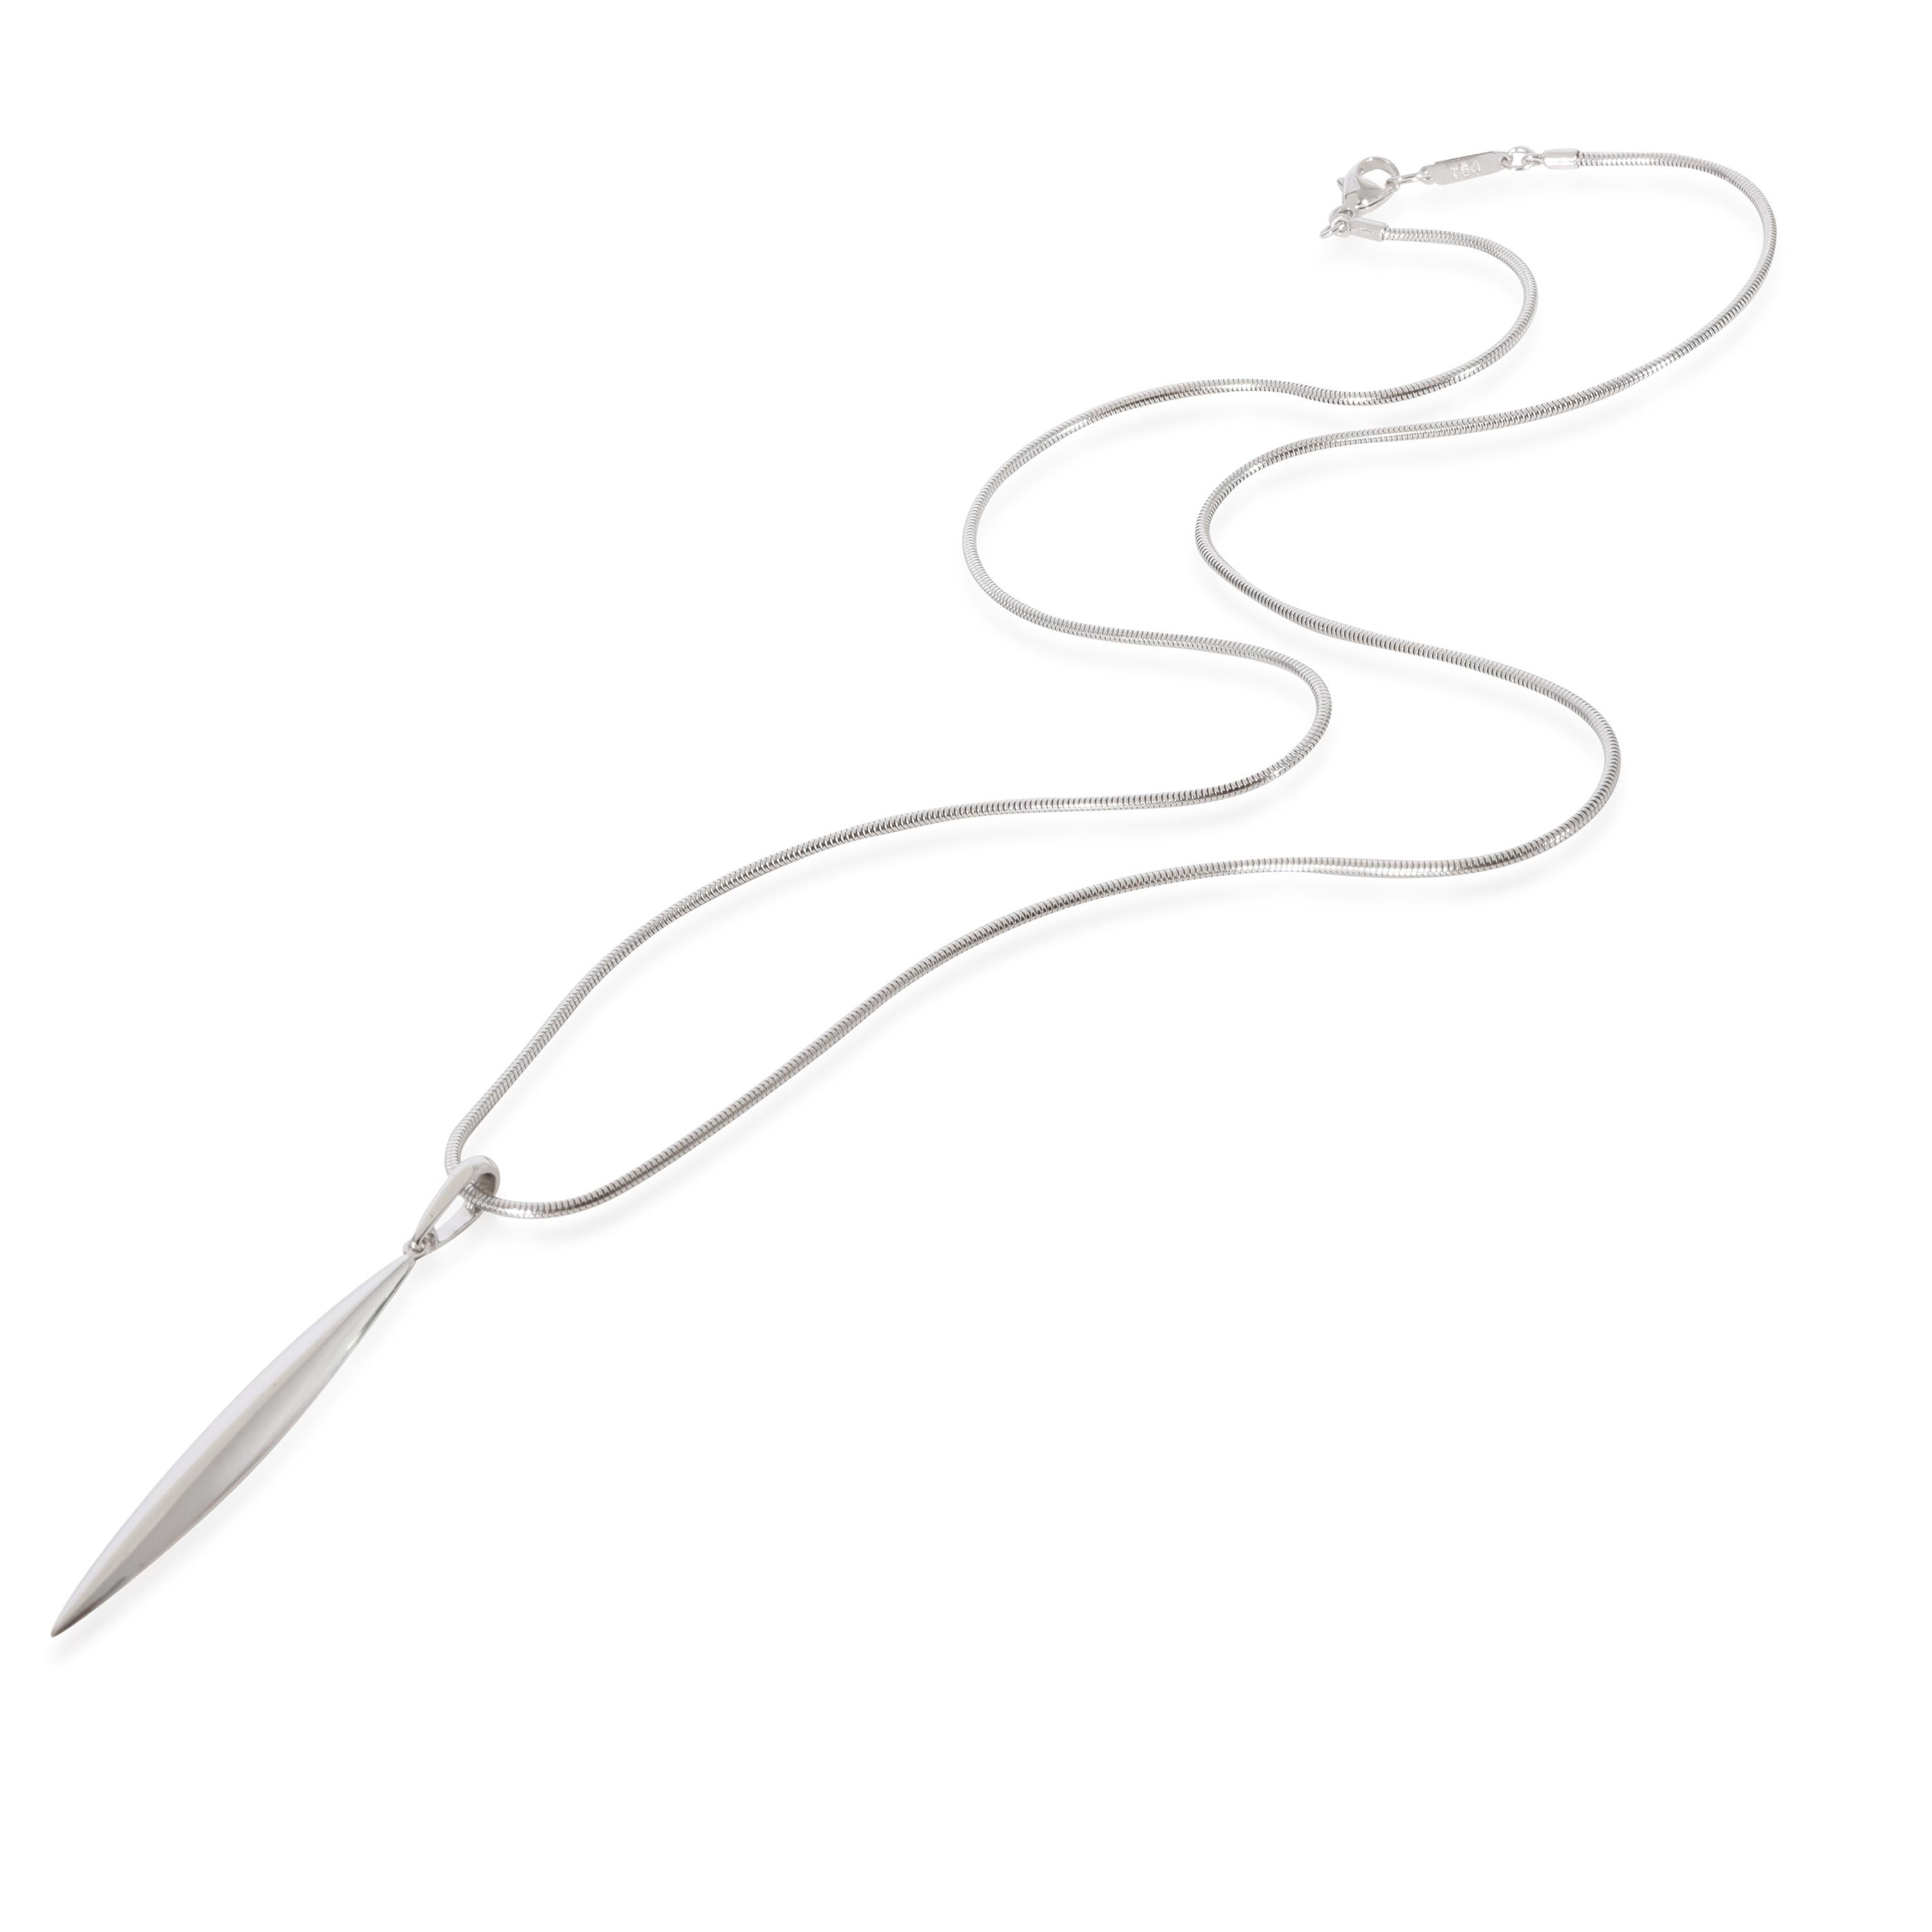 Tiffany & Co. Feather Pendant in 18K White Gold

PRIMARY DETAILS
SKU: 124778
Listing Title: Tiffany & Co. Feather Pendant in 18K White Gold
Condition Description: Retails for 2100 USD. In excellent condition and recently polished. 20 inches in